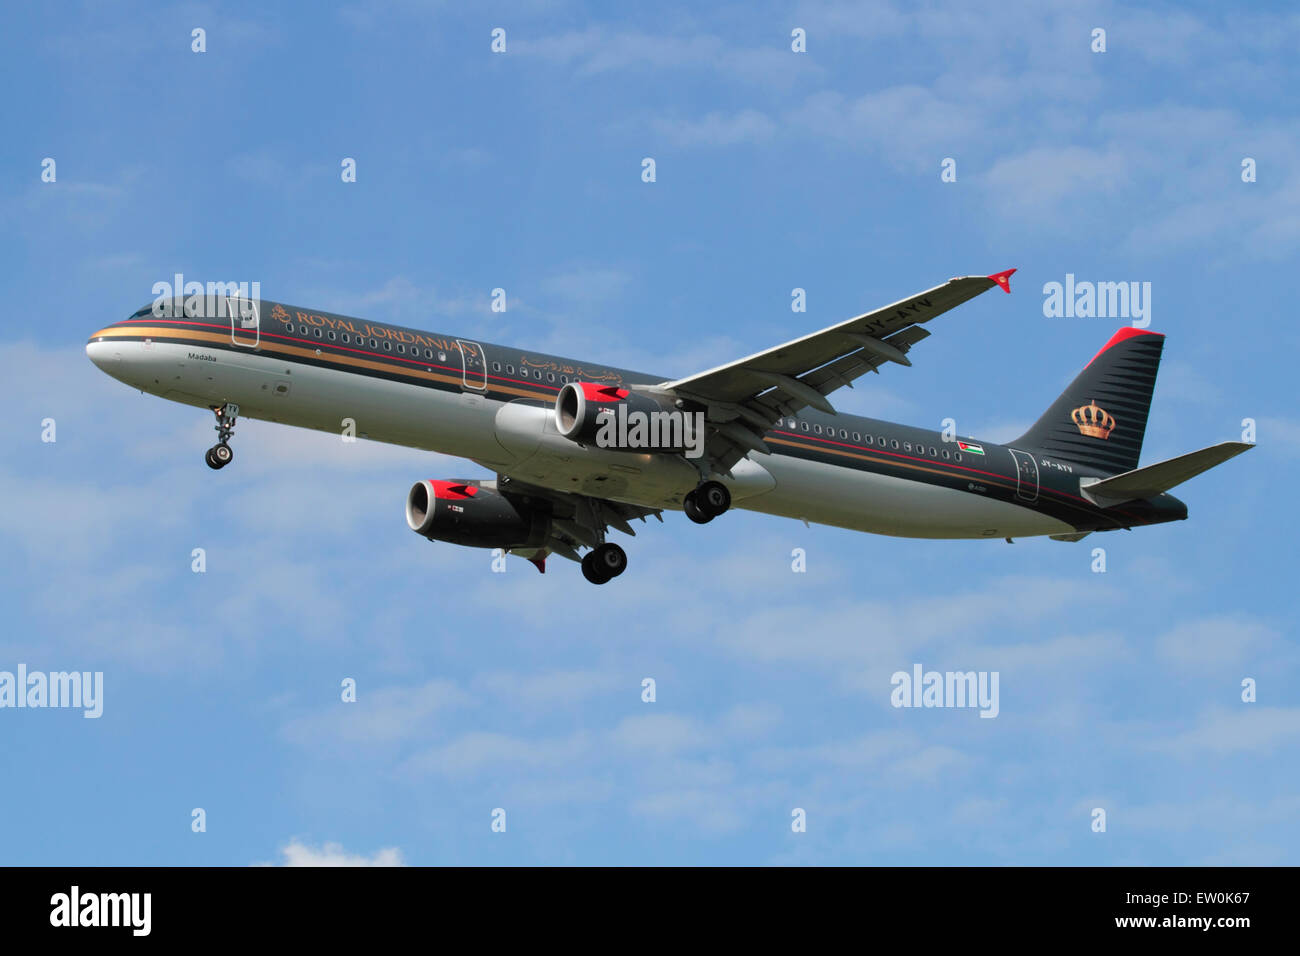 Royal Jordanian Airlines Airbus A321 commercial airliner on approach Stock Photo